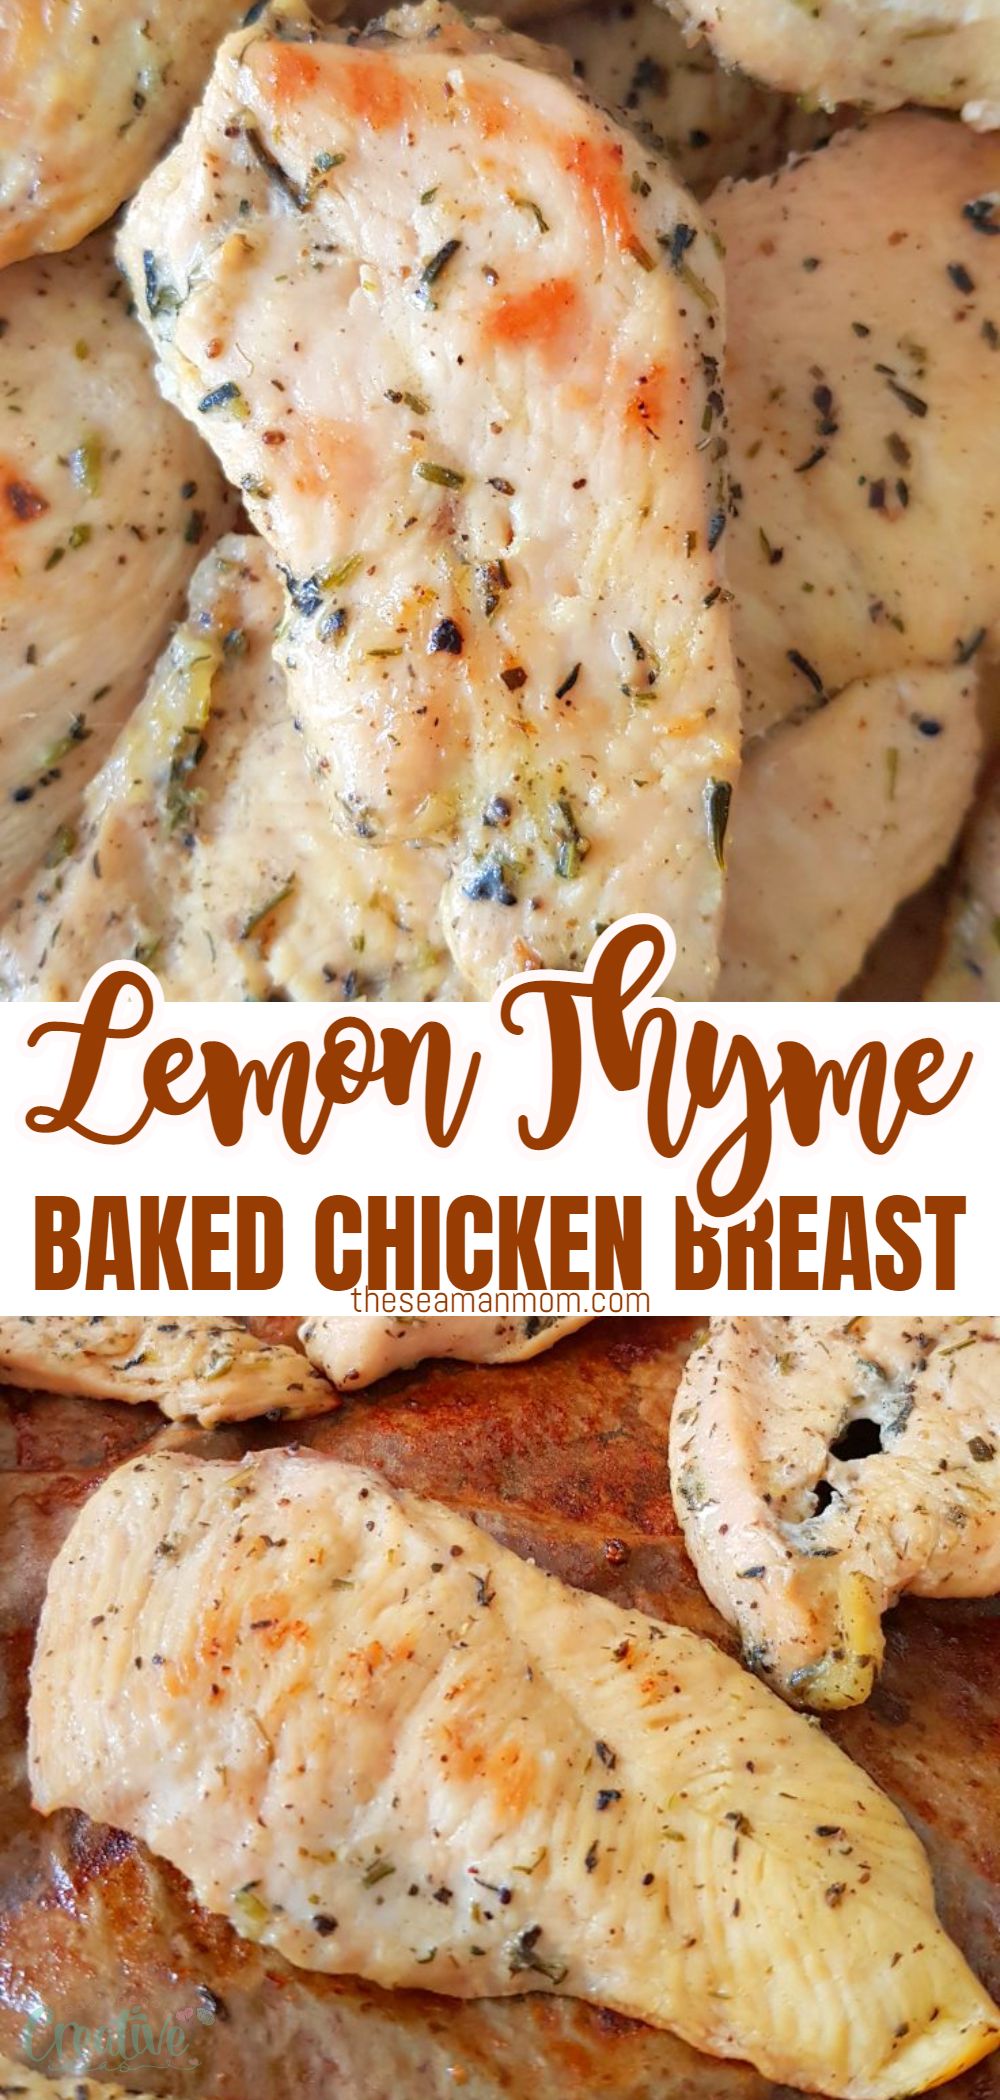 Chicken breast is great in all diets as it is lean and can easily be added to any salad or eaten on its own. Today I’m going to show you how to get a delicious oven baked lemon chicken breast marinated in lemon, garlic, olive oil and herbs. via @petroneagu